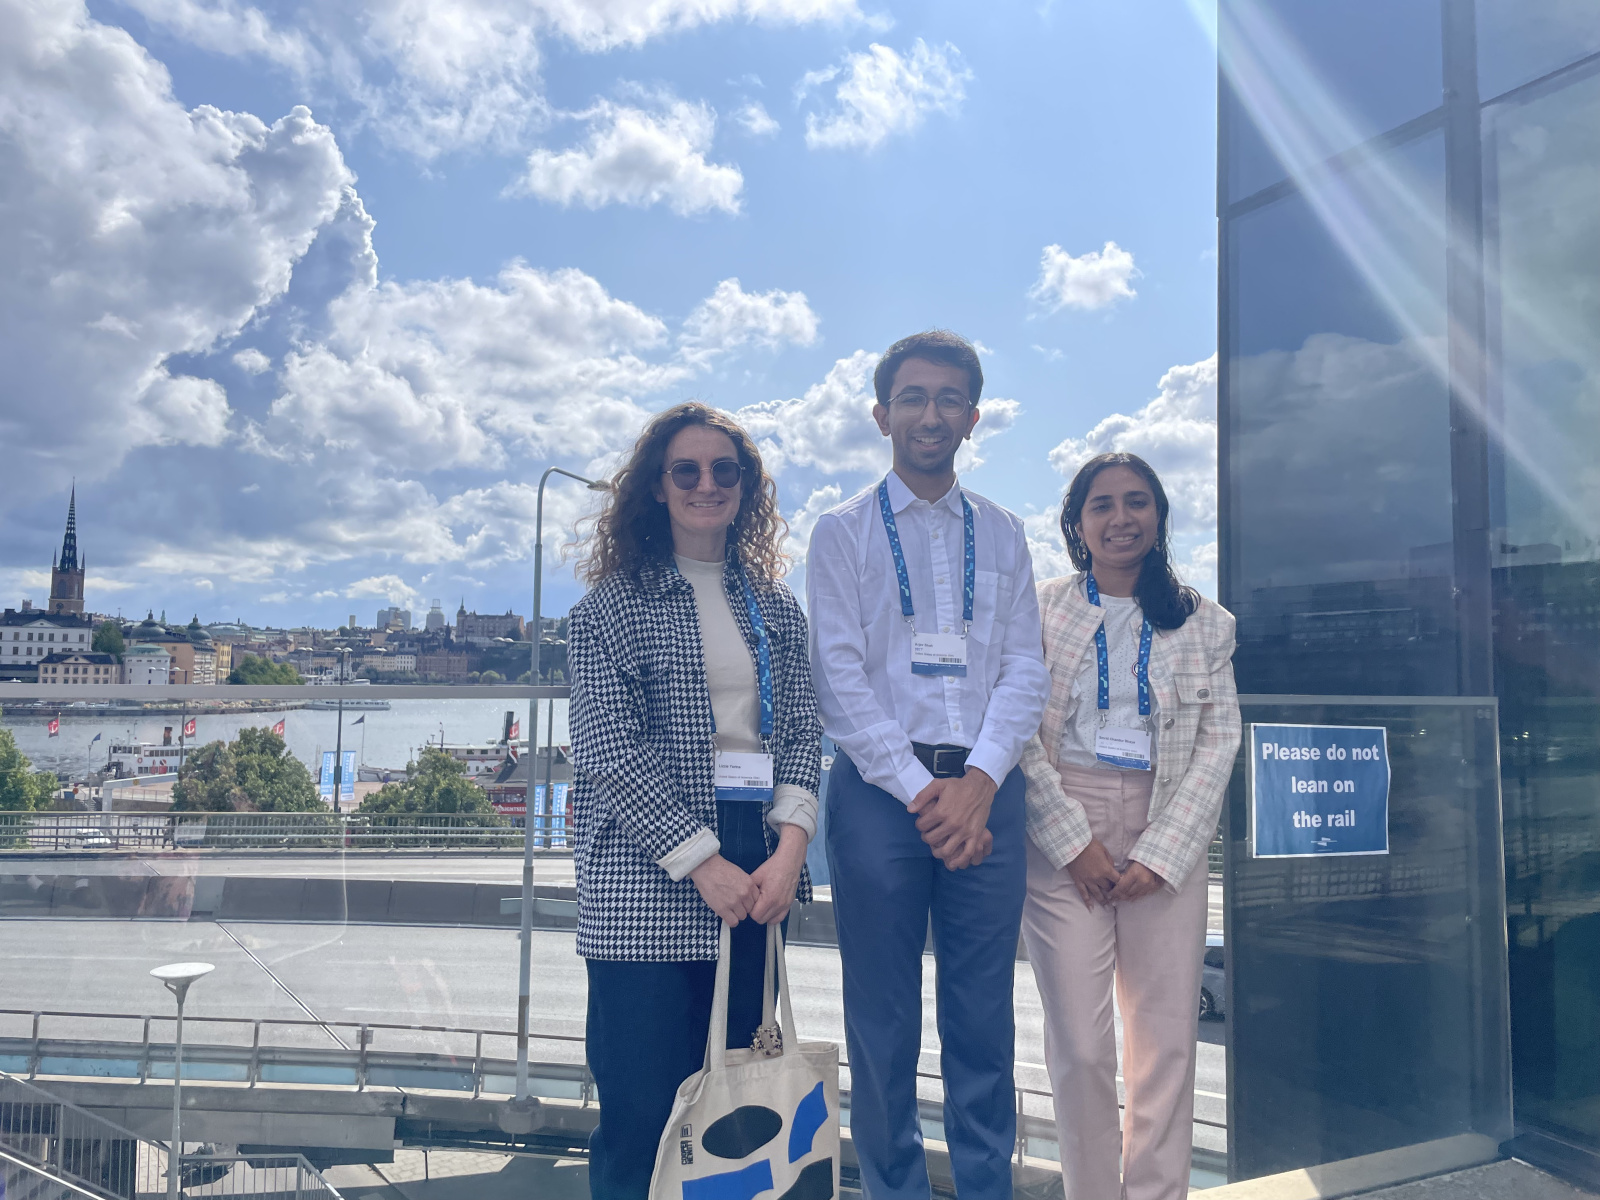 From left to right: Lizzie Yarina, Arjav Shah, and Smriti Bhaya in front of Stockholm landscape